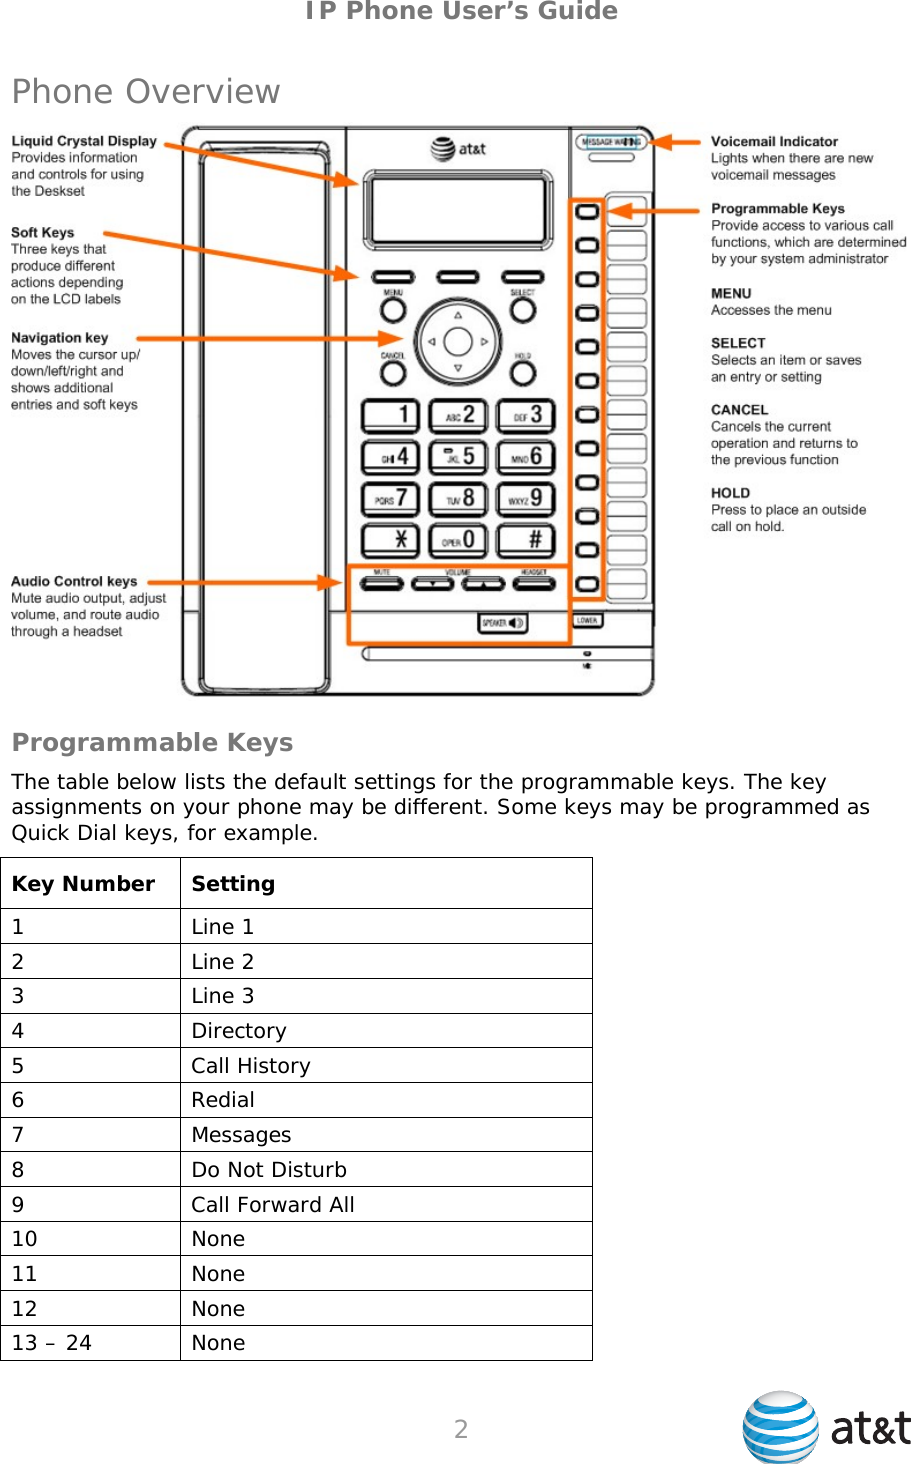 IP Phone User’s Guide Phone Overview  Programmable Keys The table below lists the default settings for the programmable keys. The key assignments on your phone may be different. Some keys may be programmed as Quick Dial keys, for example. Key Number  Setting 1 Line 1 2 Line 2 3 Line 3 4 Directory 5 Call History 6 Redial 7 Messages 8  Do Not Disturb 9  Call Forward All 10 None 11 None 12 None 13 – 24  None  2   